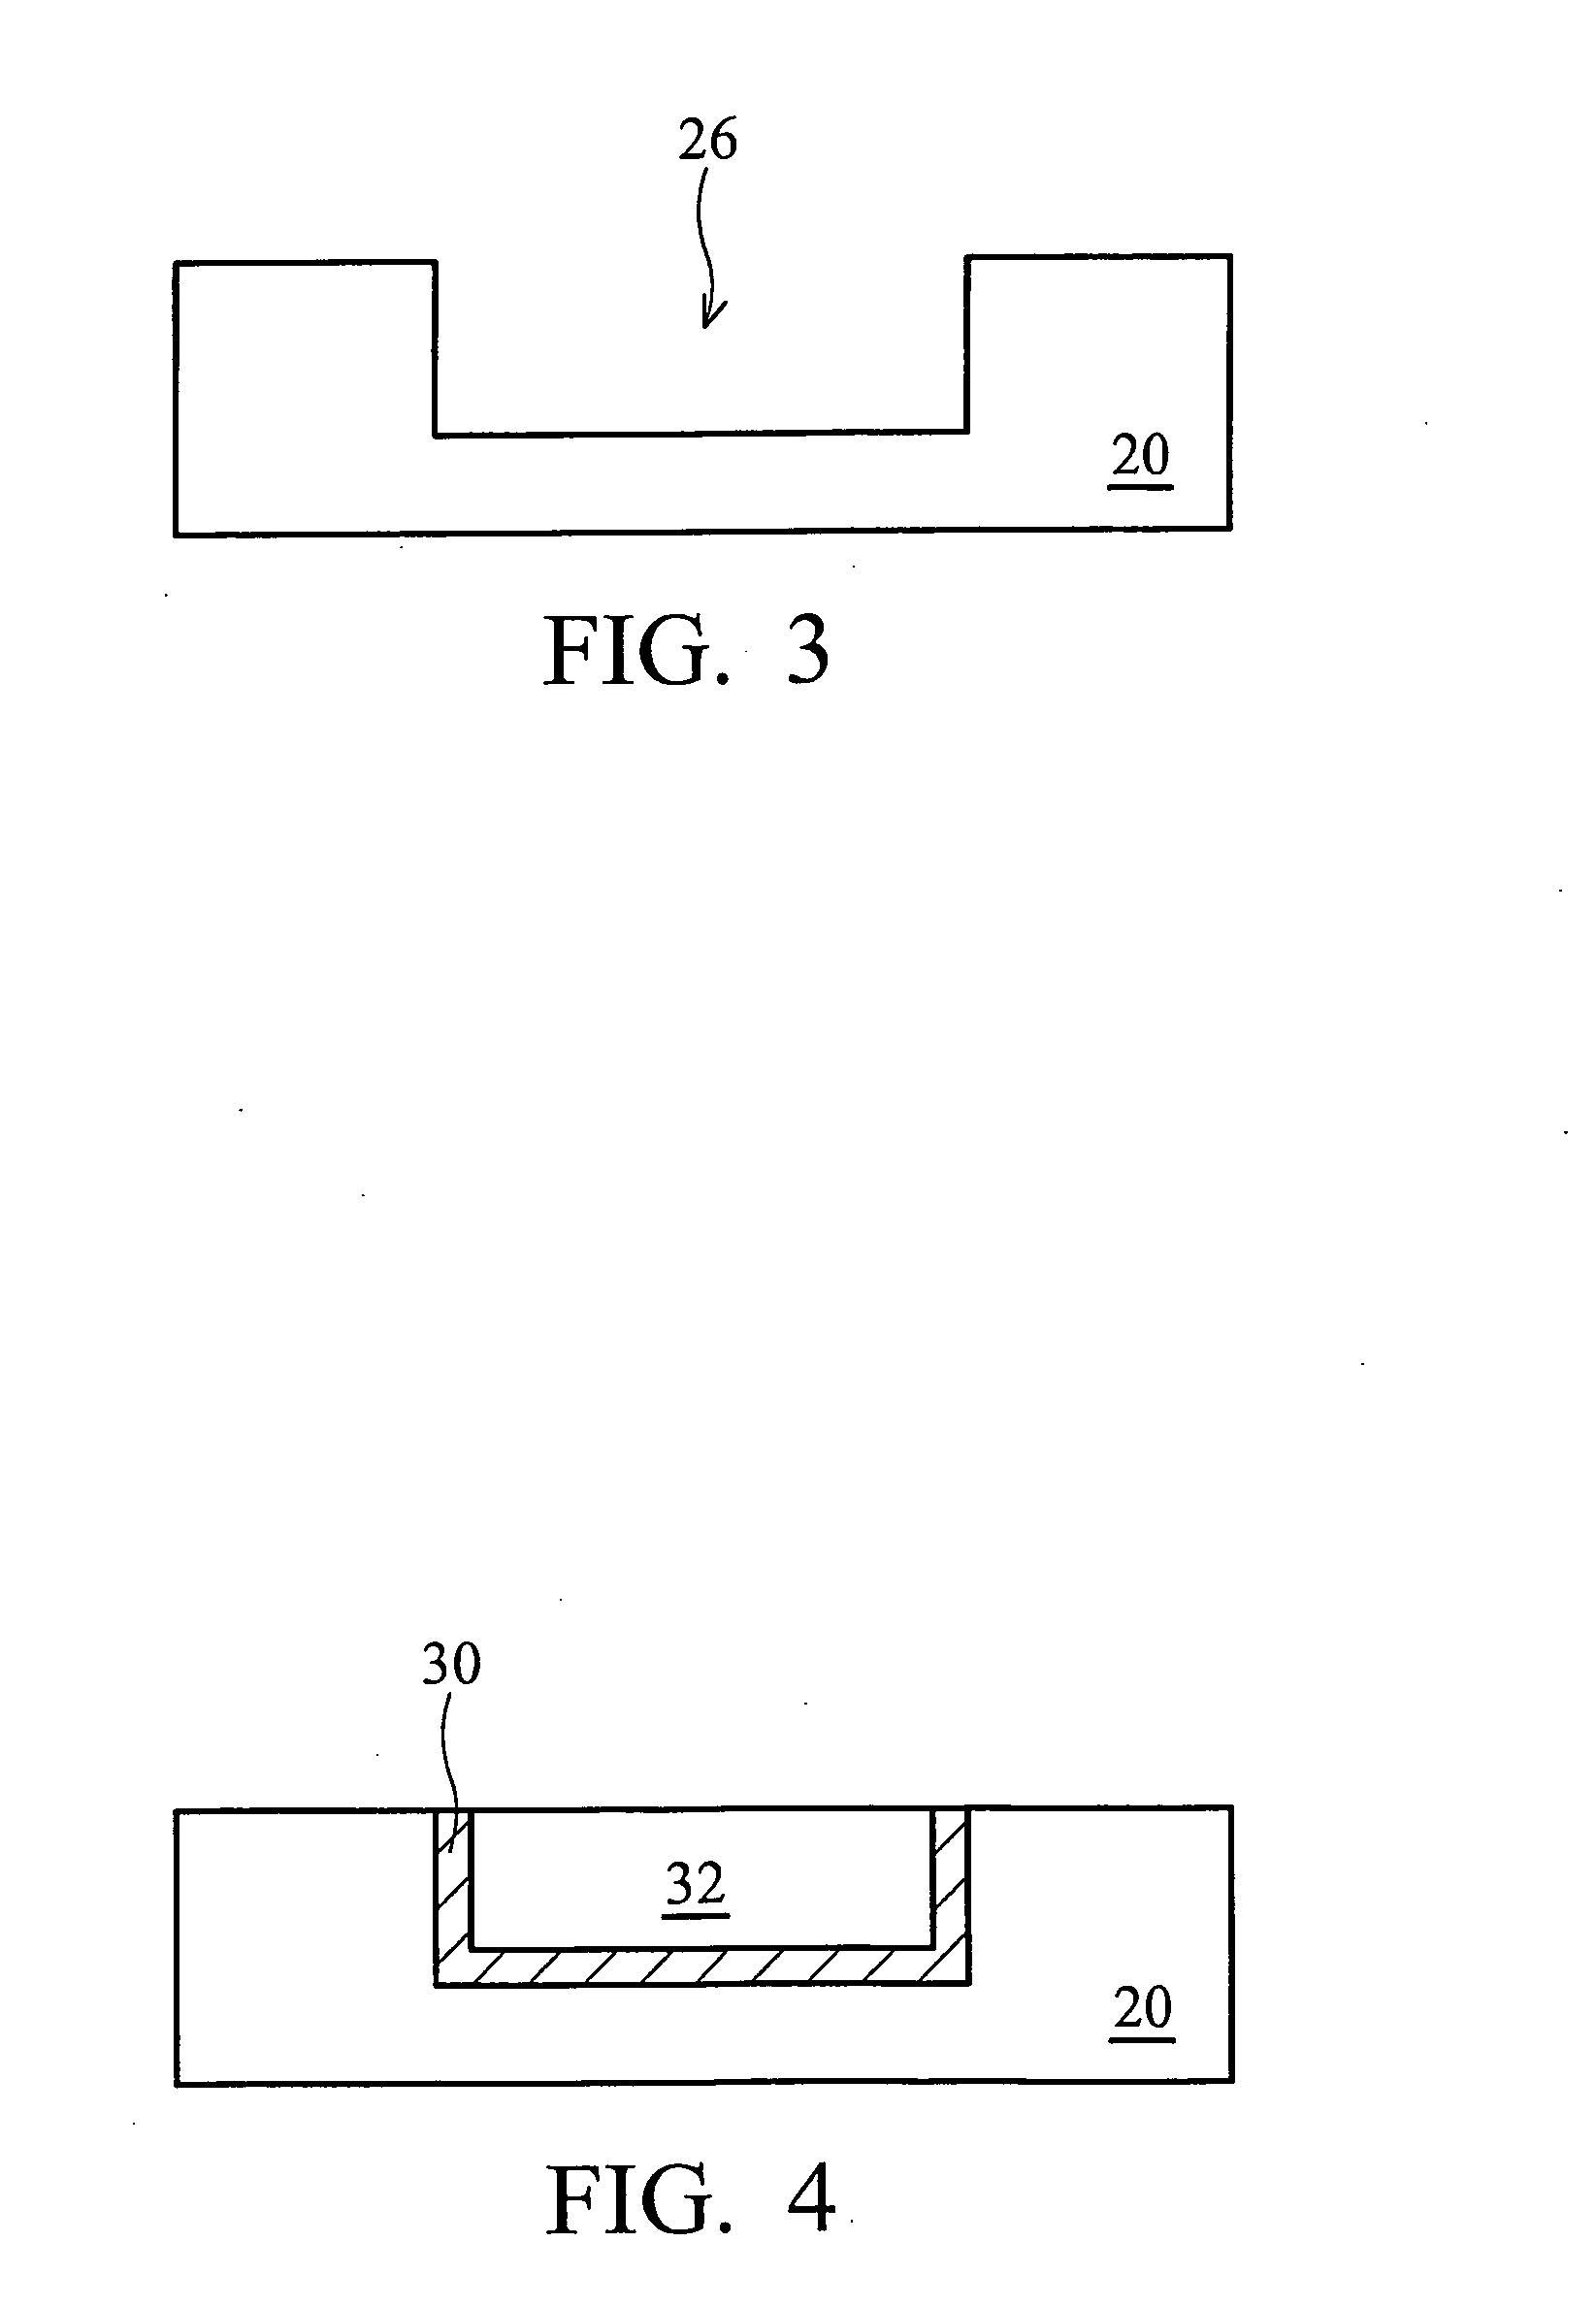 Interconnect structure having a silicide/germanide cap layer